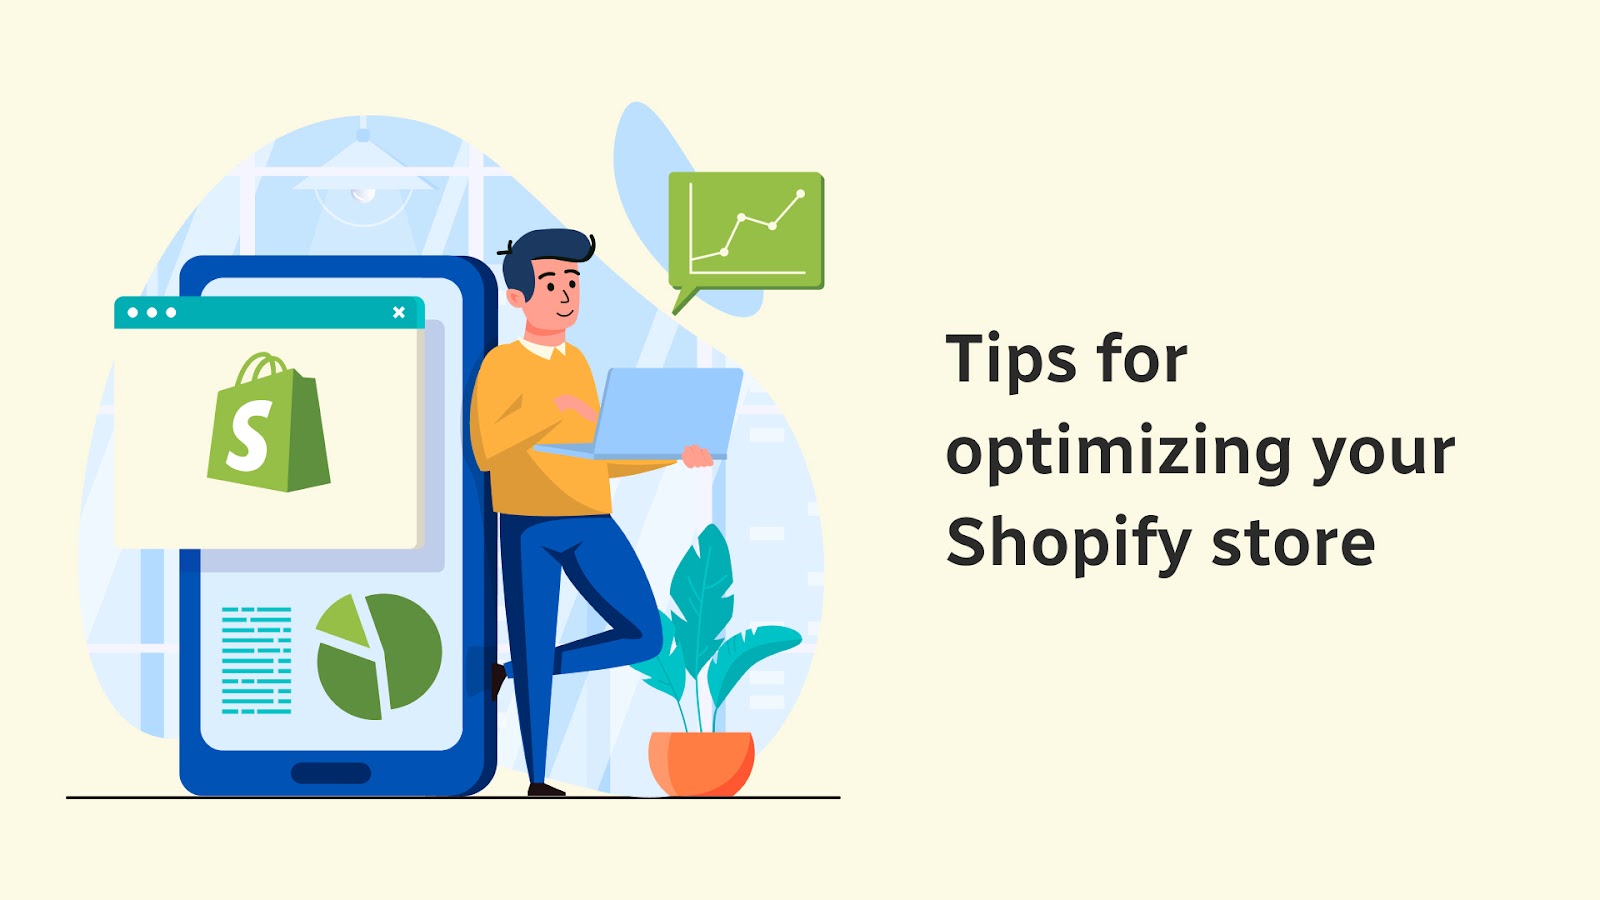 Tips for optimizing your Shopify store